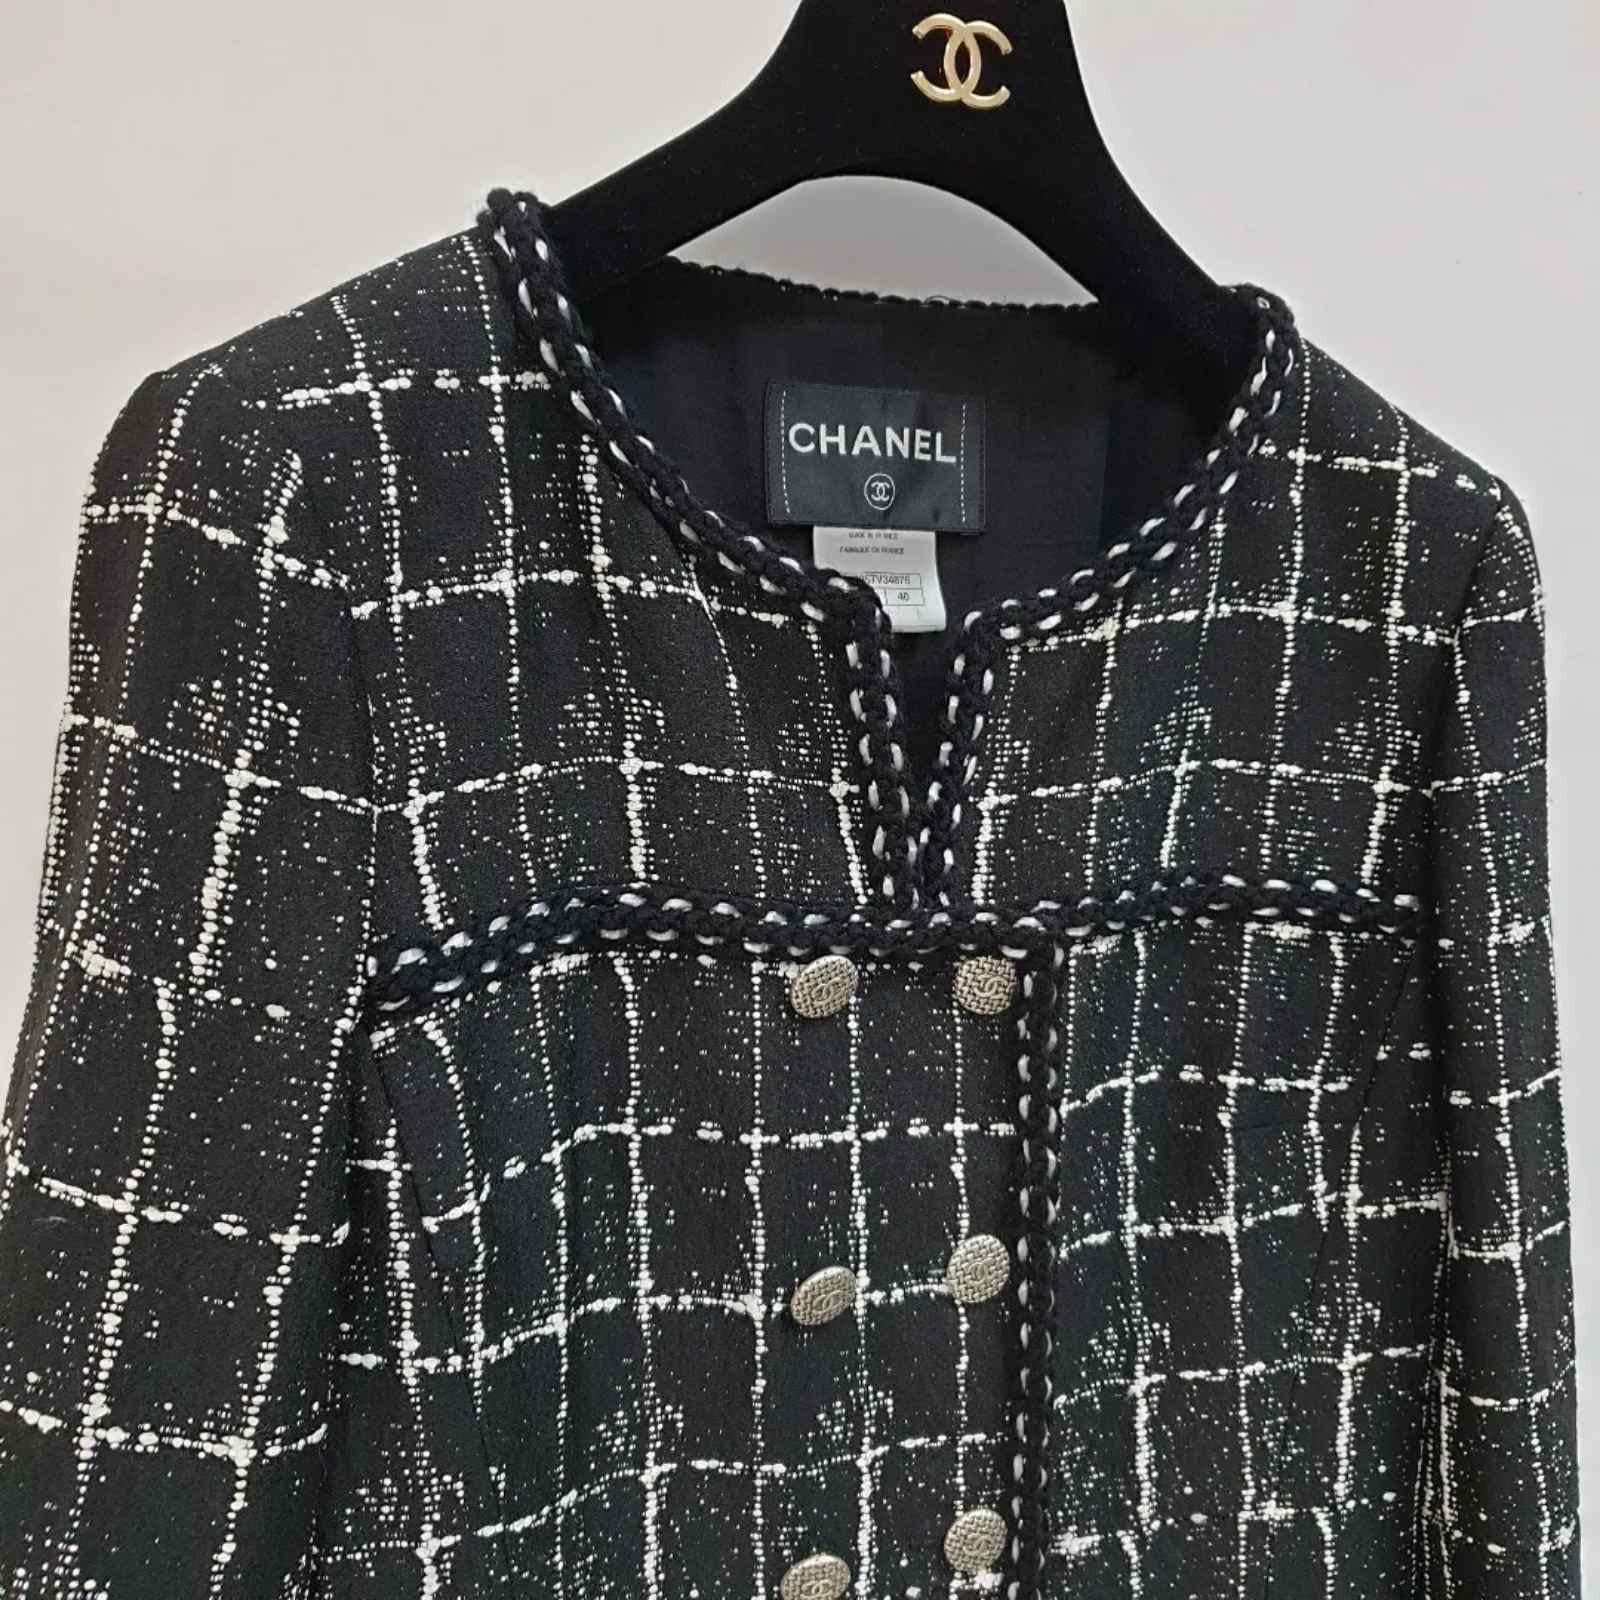 Chanel 2014 Black and White Tweed Jacket 1